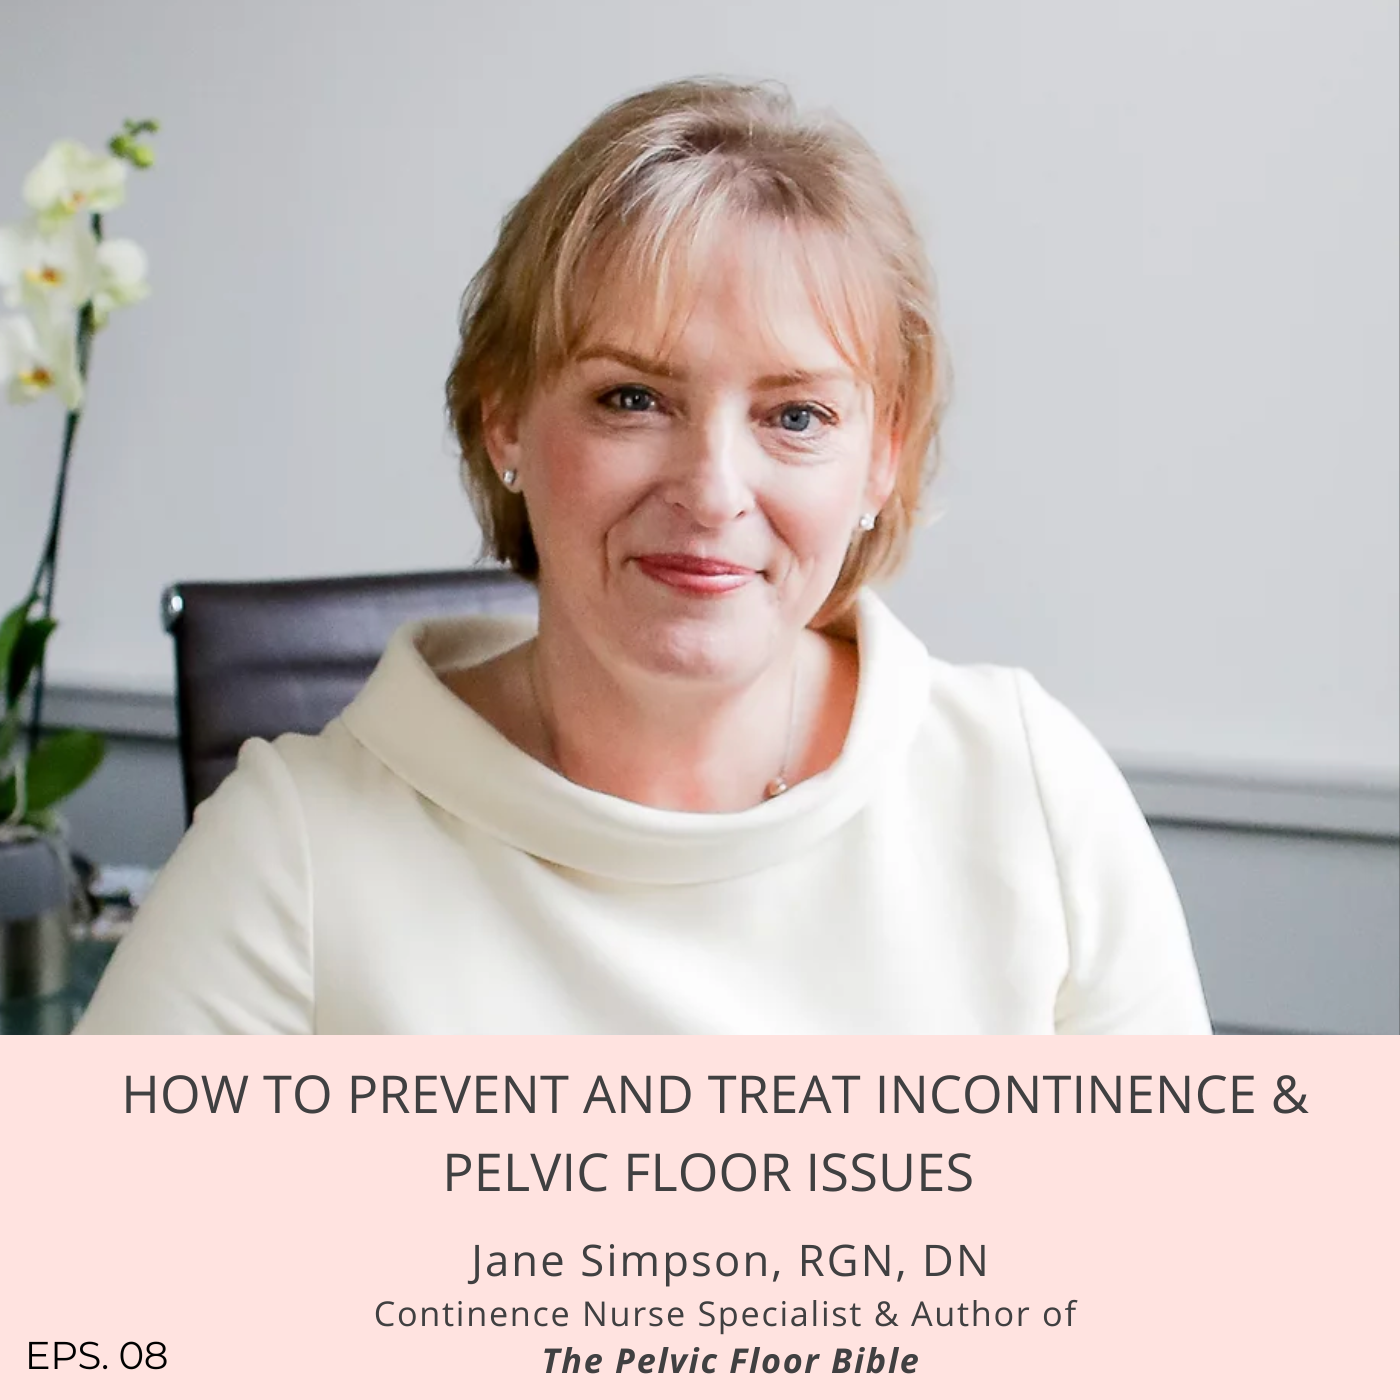 Episode 8: How to Prevent and Treat Incontinence & Pelvic Floor Issues with Jane Simpson